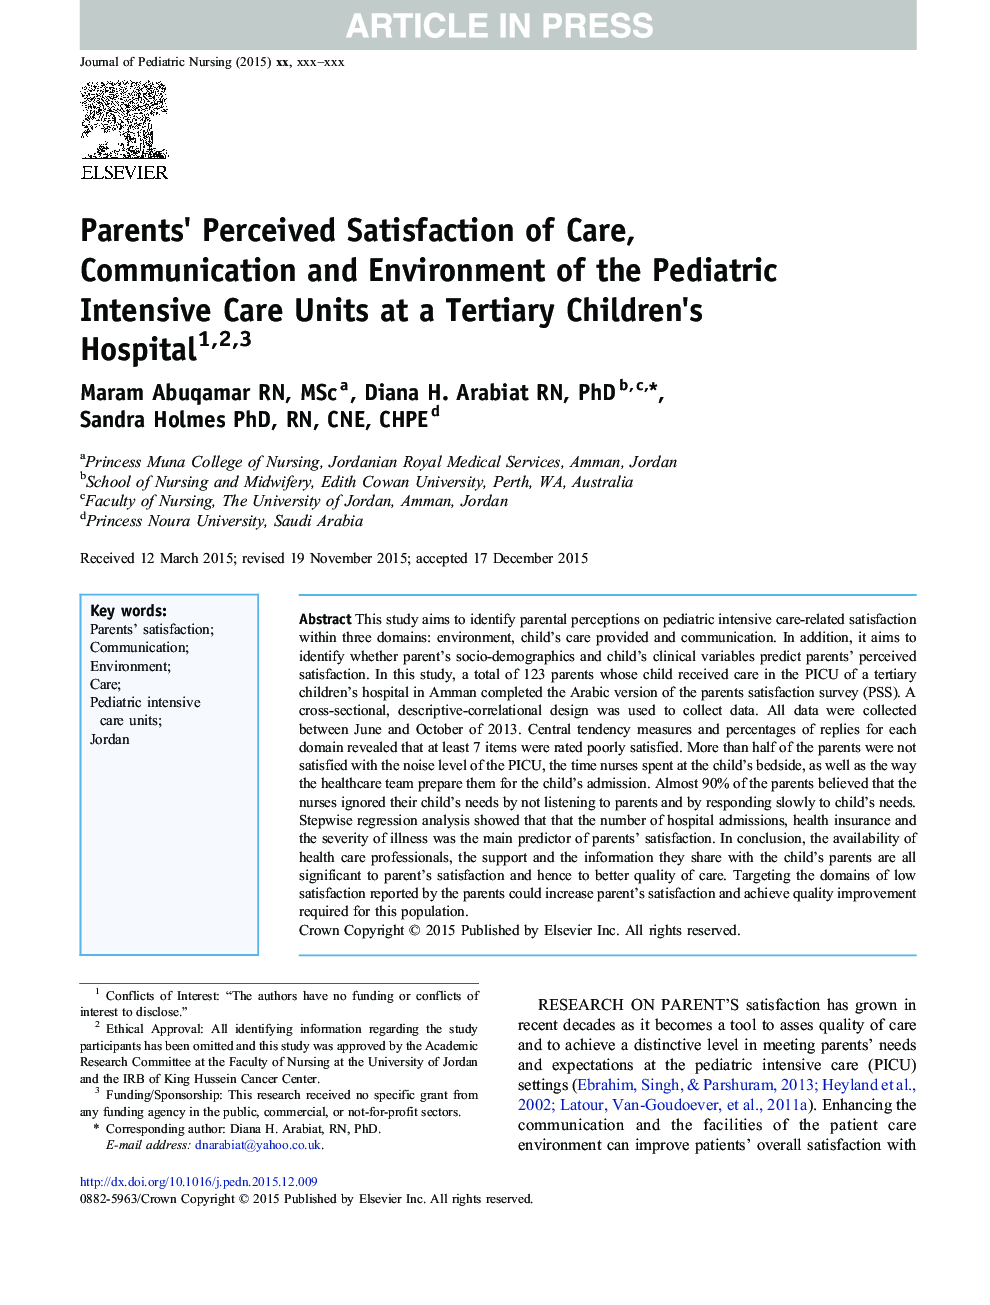 Parents' Perceived Satisfaction of Care, Communication and Environment of the Pediatric Intensive Care Units at a Tertiary Children's Hospital